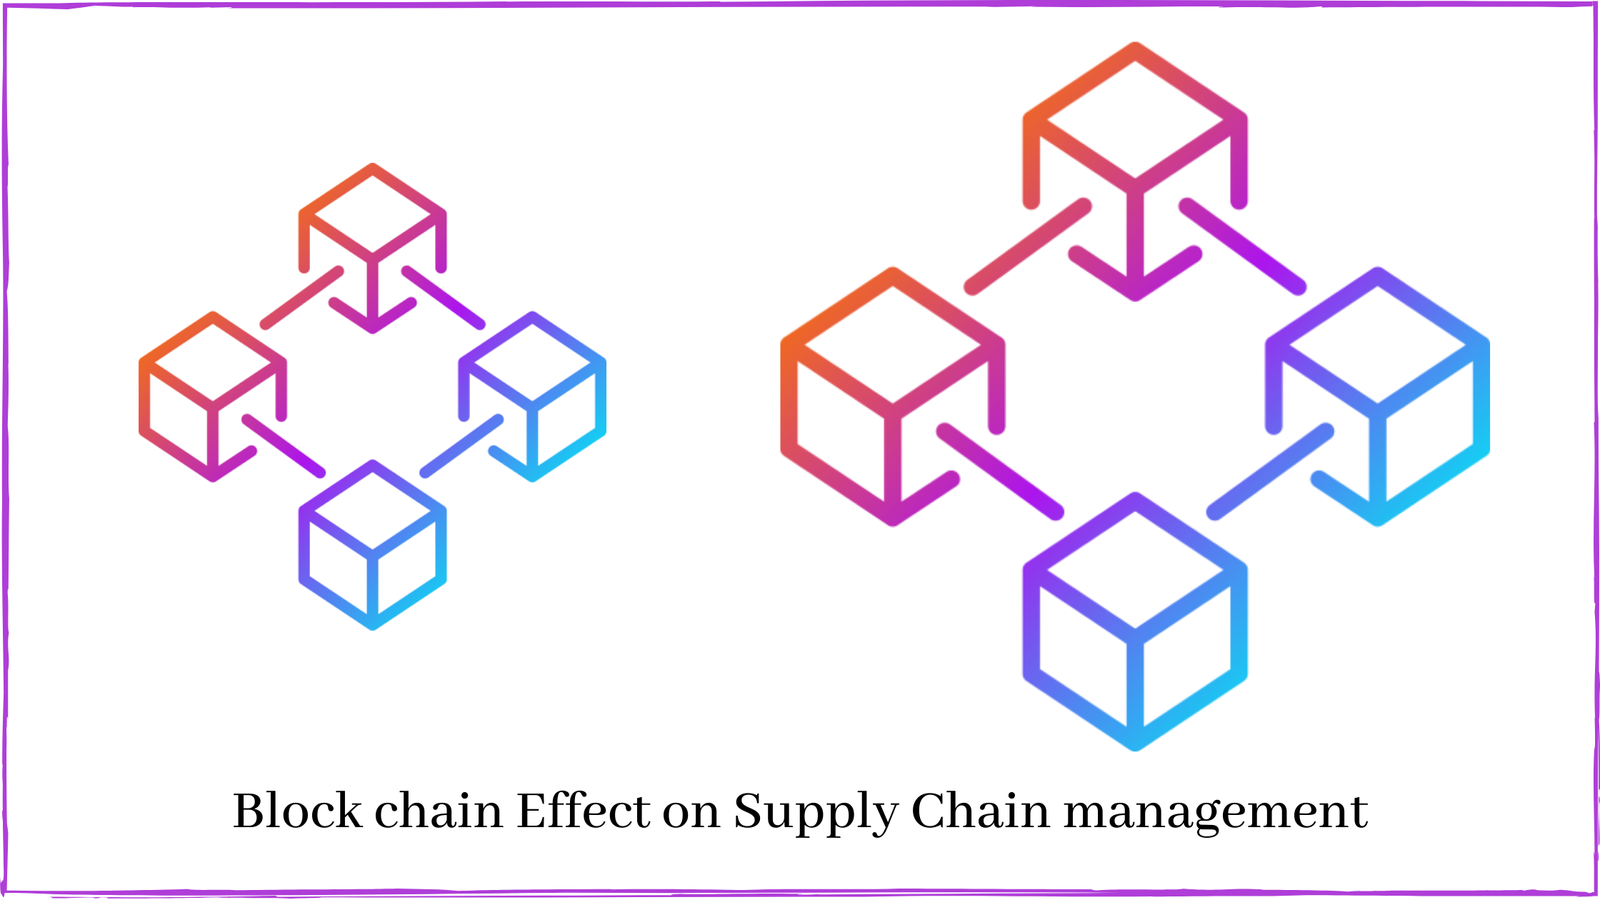 Block chain Effect on Supply Chain management